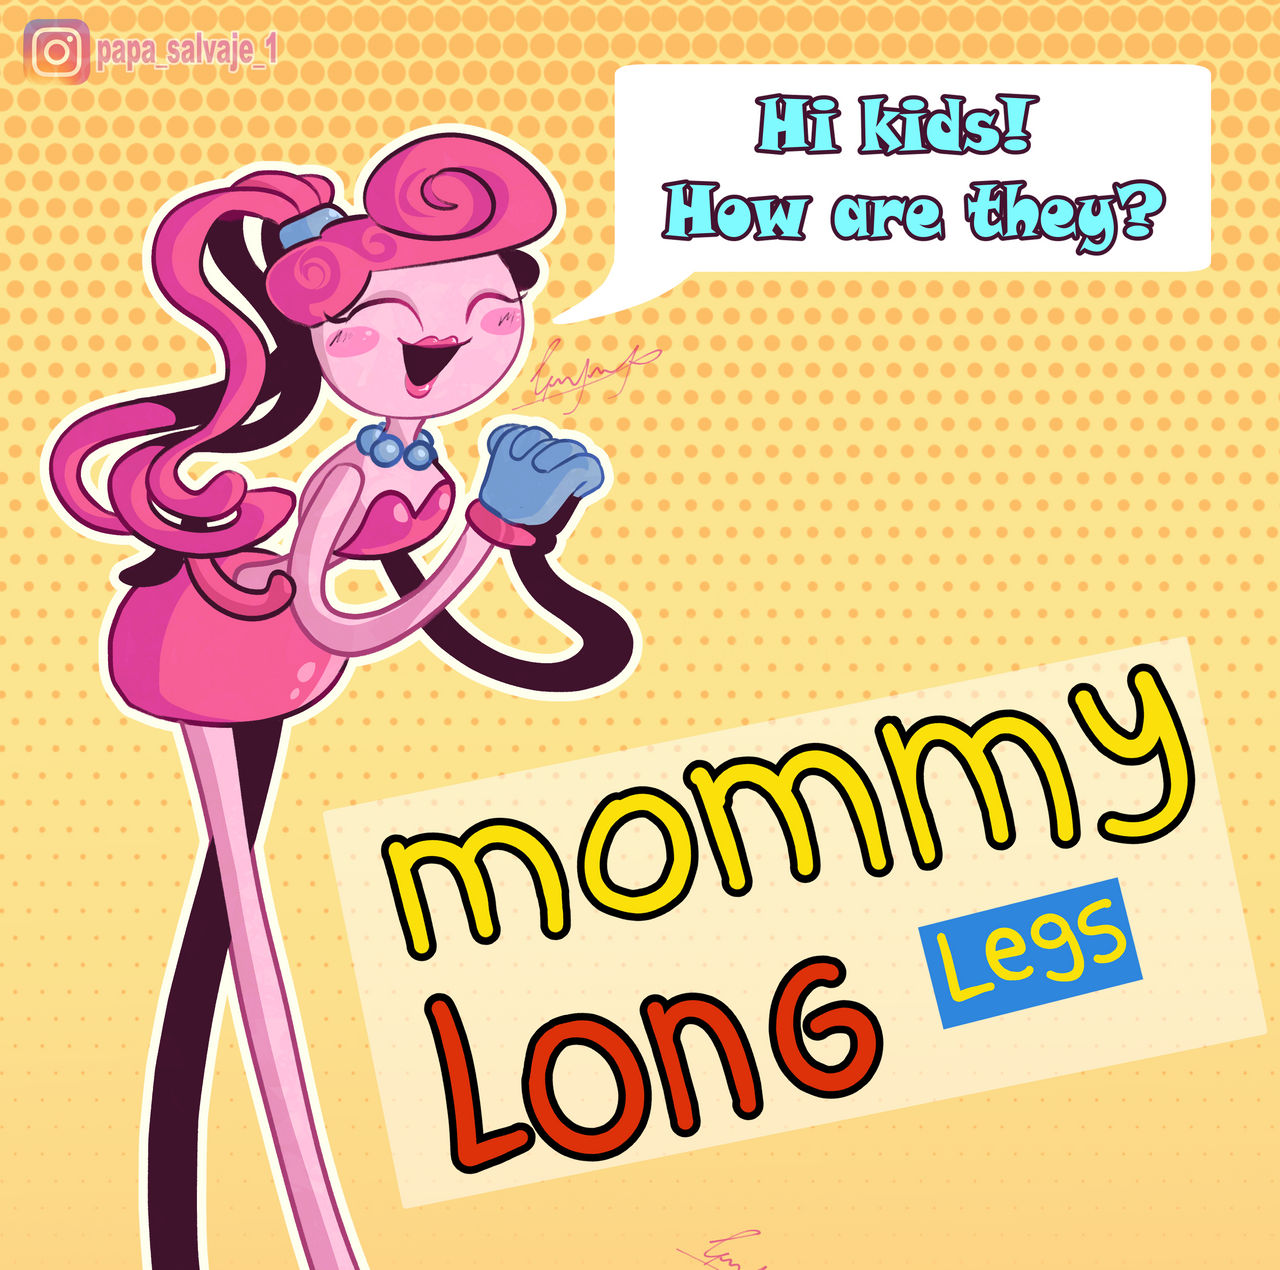 Ask Mommy Long Legs Questions and Answers by MrArtman1999 on DeviantArt